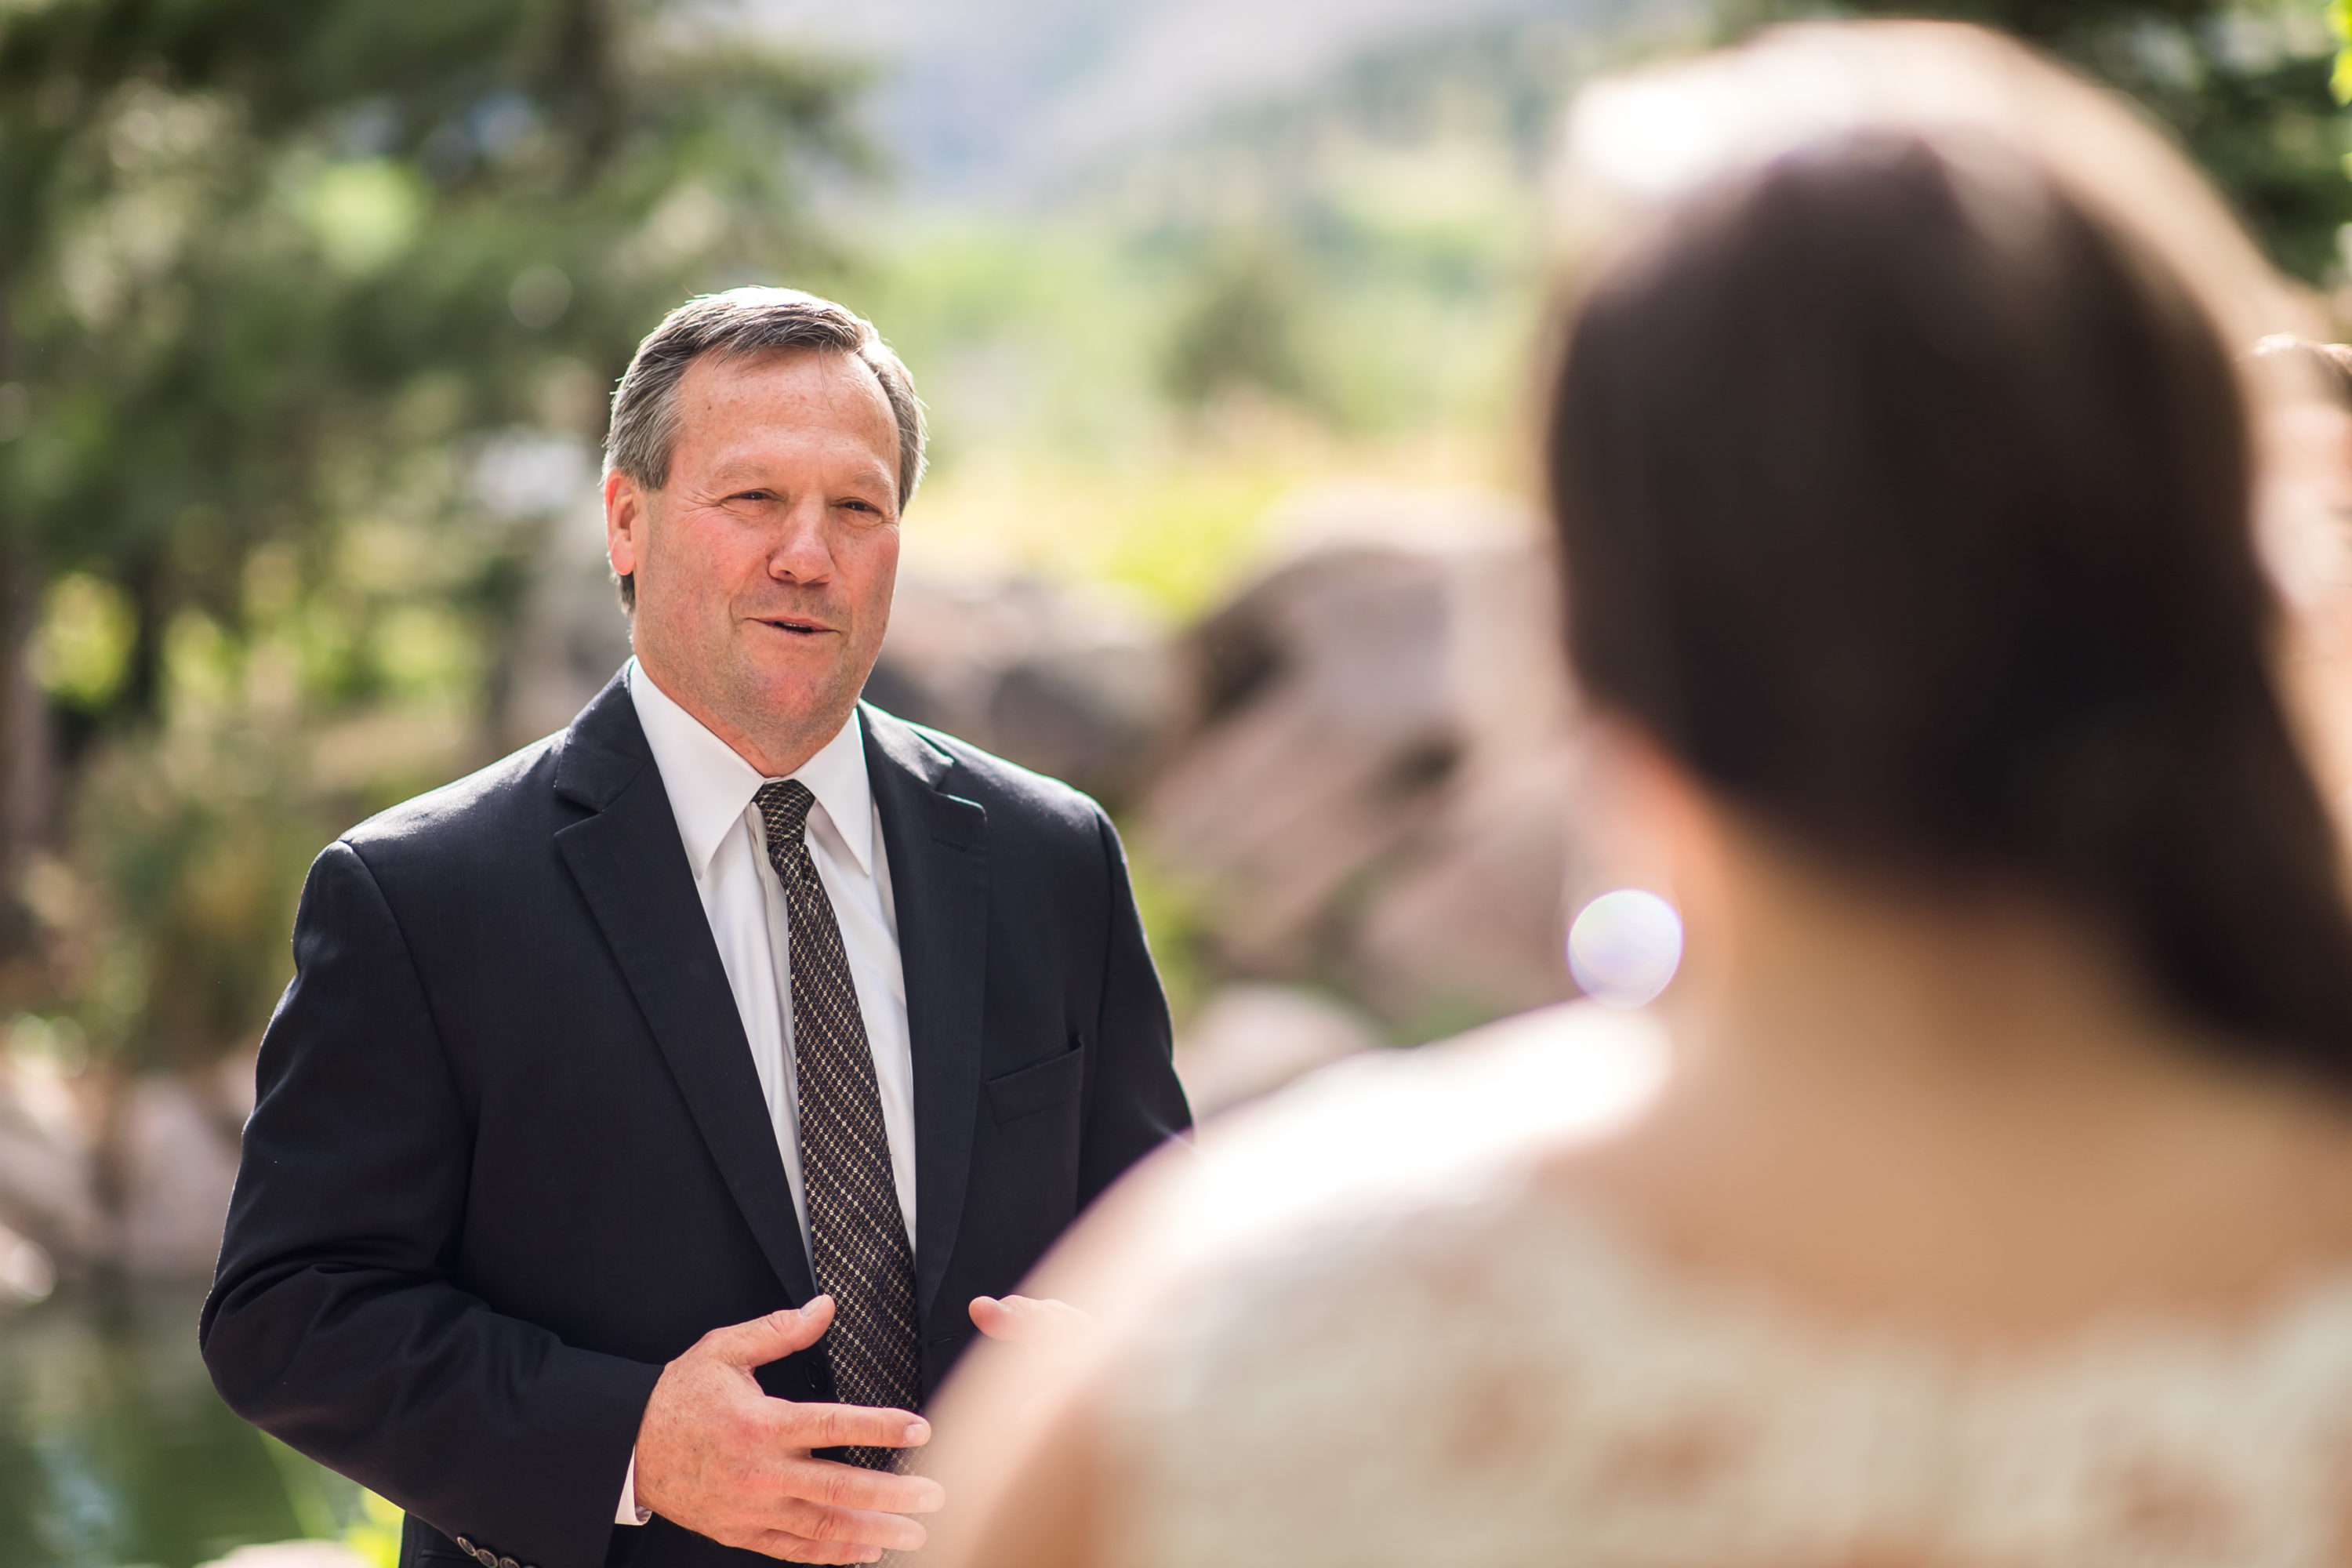 The bride's father gives a speech after a Greenbriar Inn wedding in Boulder, Colorado.